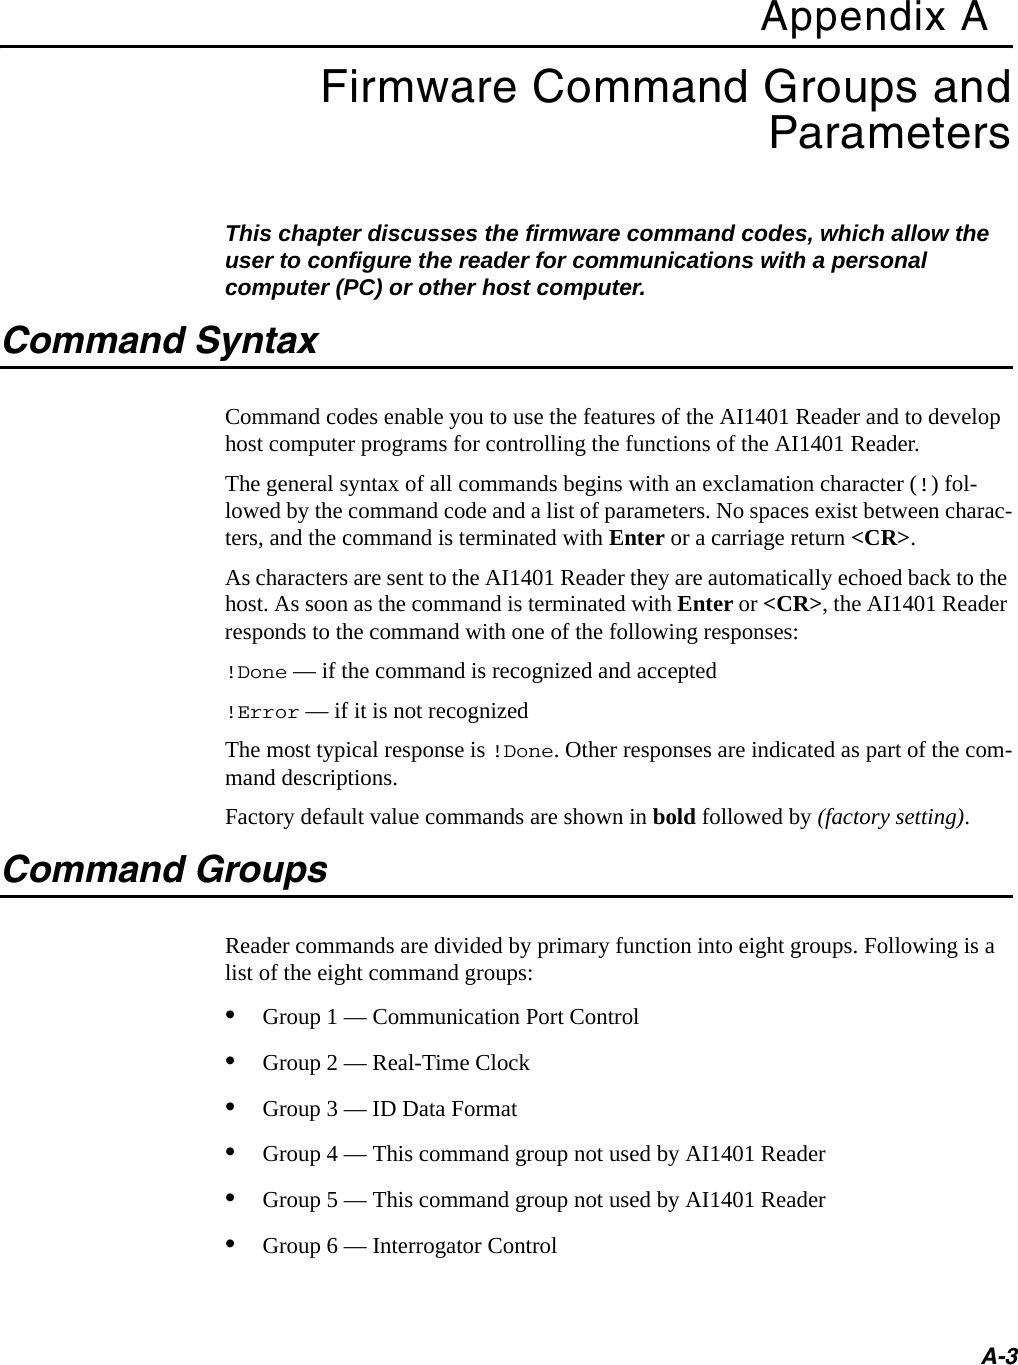 A-3Appendix AFirmware Command Groups and ParametersThis chapter discusses the firmware command codes, which allow the user to configure the reader for communications with a personal computer (PC) or other host computer.Command SyntaxCommand codes enable you to use the features of the AI1401 Reader and to develop host computer programs for controlling the functions of the AI1401 Reader. The general syntax of all commands begins with an exclamation character (!) fol-lowed by the command code and a list of parameters. No spaces exist between charac-ters, and the command is terminated with Enter or a carriage return &lt;CR&gt;.As characters are sent to the AI1401 Reader they are automatically echoed back to the host. As soon as the command is terminated with Enter or &lt;CR&gt;, the AI1401 Reader responds to the command with one of the following responses:!Done — if the command is recognized and accepted!Error — if it is not recognizedThe most typical response is !Done. Other responses are indicated as part of the com-mand descriptions.Factory default value commands are shown in bold followed by (factory setting).Command GroupsReader commands are divided by primary function into eight groups. Following is a list of the eight command groups:•Group 1 — Communication Port Control •Group 2 — Real-Time Clock•Group 3 — ID Data Format•Group 4 — This command group not used by AI1401 Reader•Group 5 — This command group not used by AI1401 Reader•Group 6 — Interrogator Control